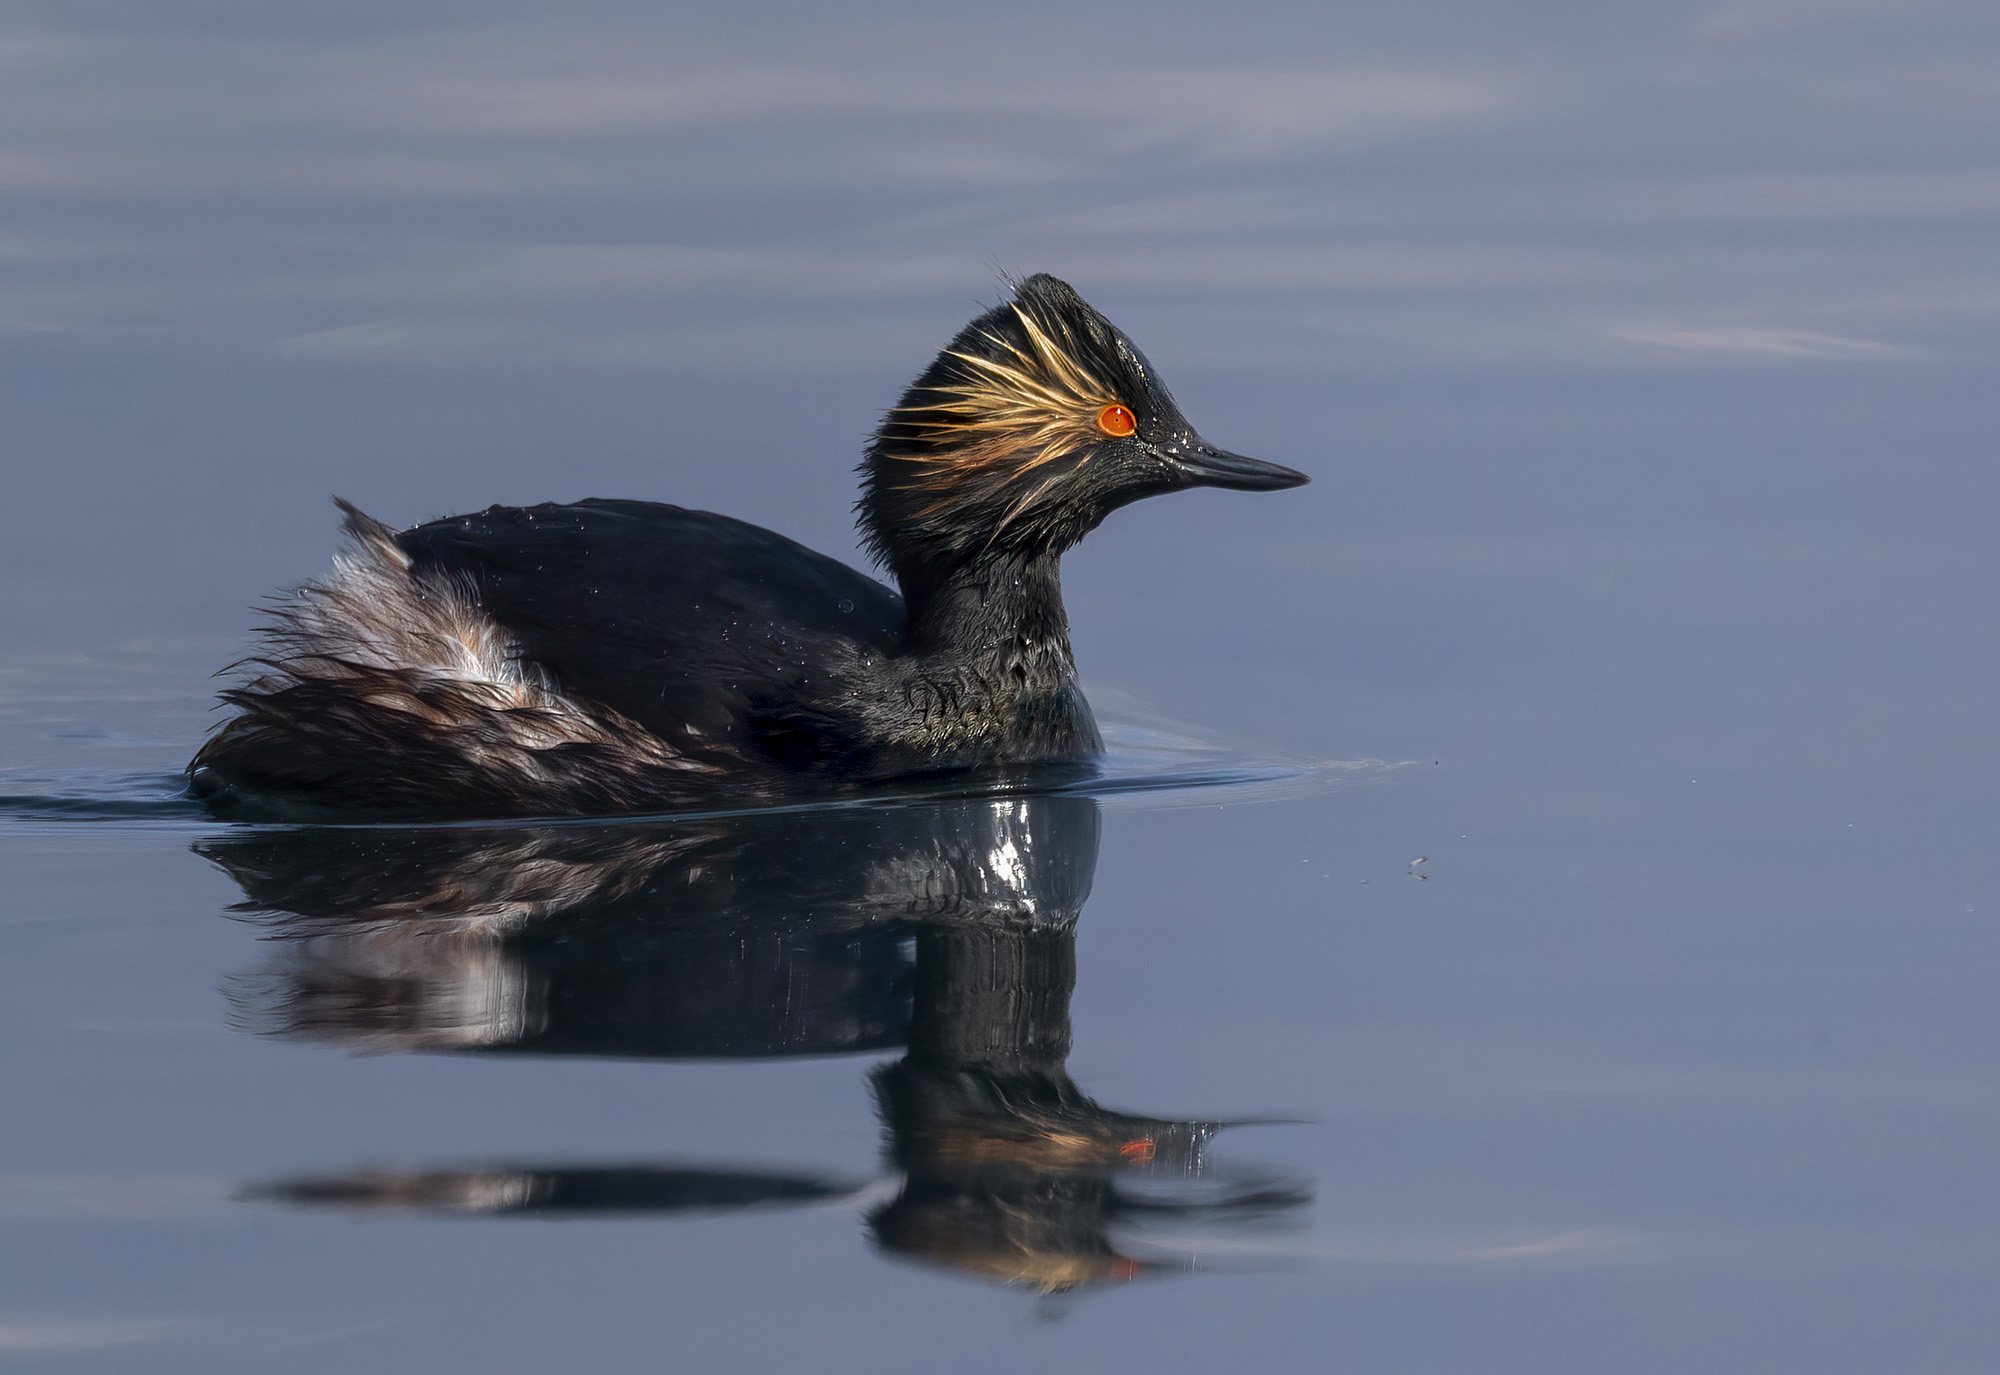 pitch black, small grebe in livery...